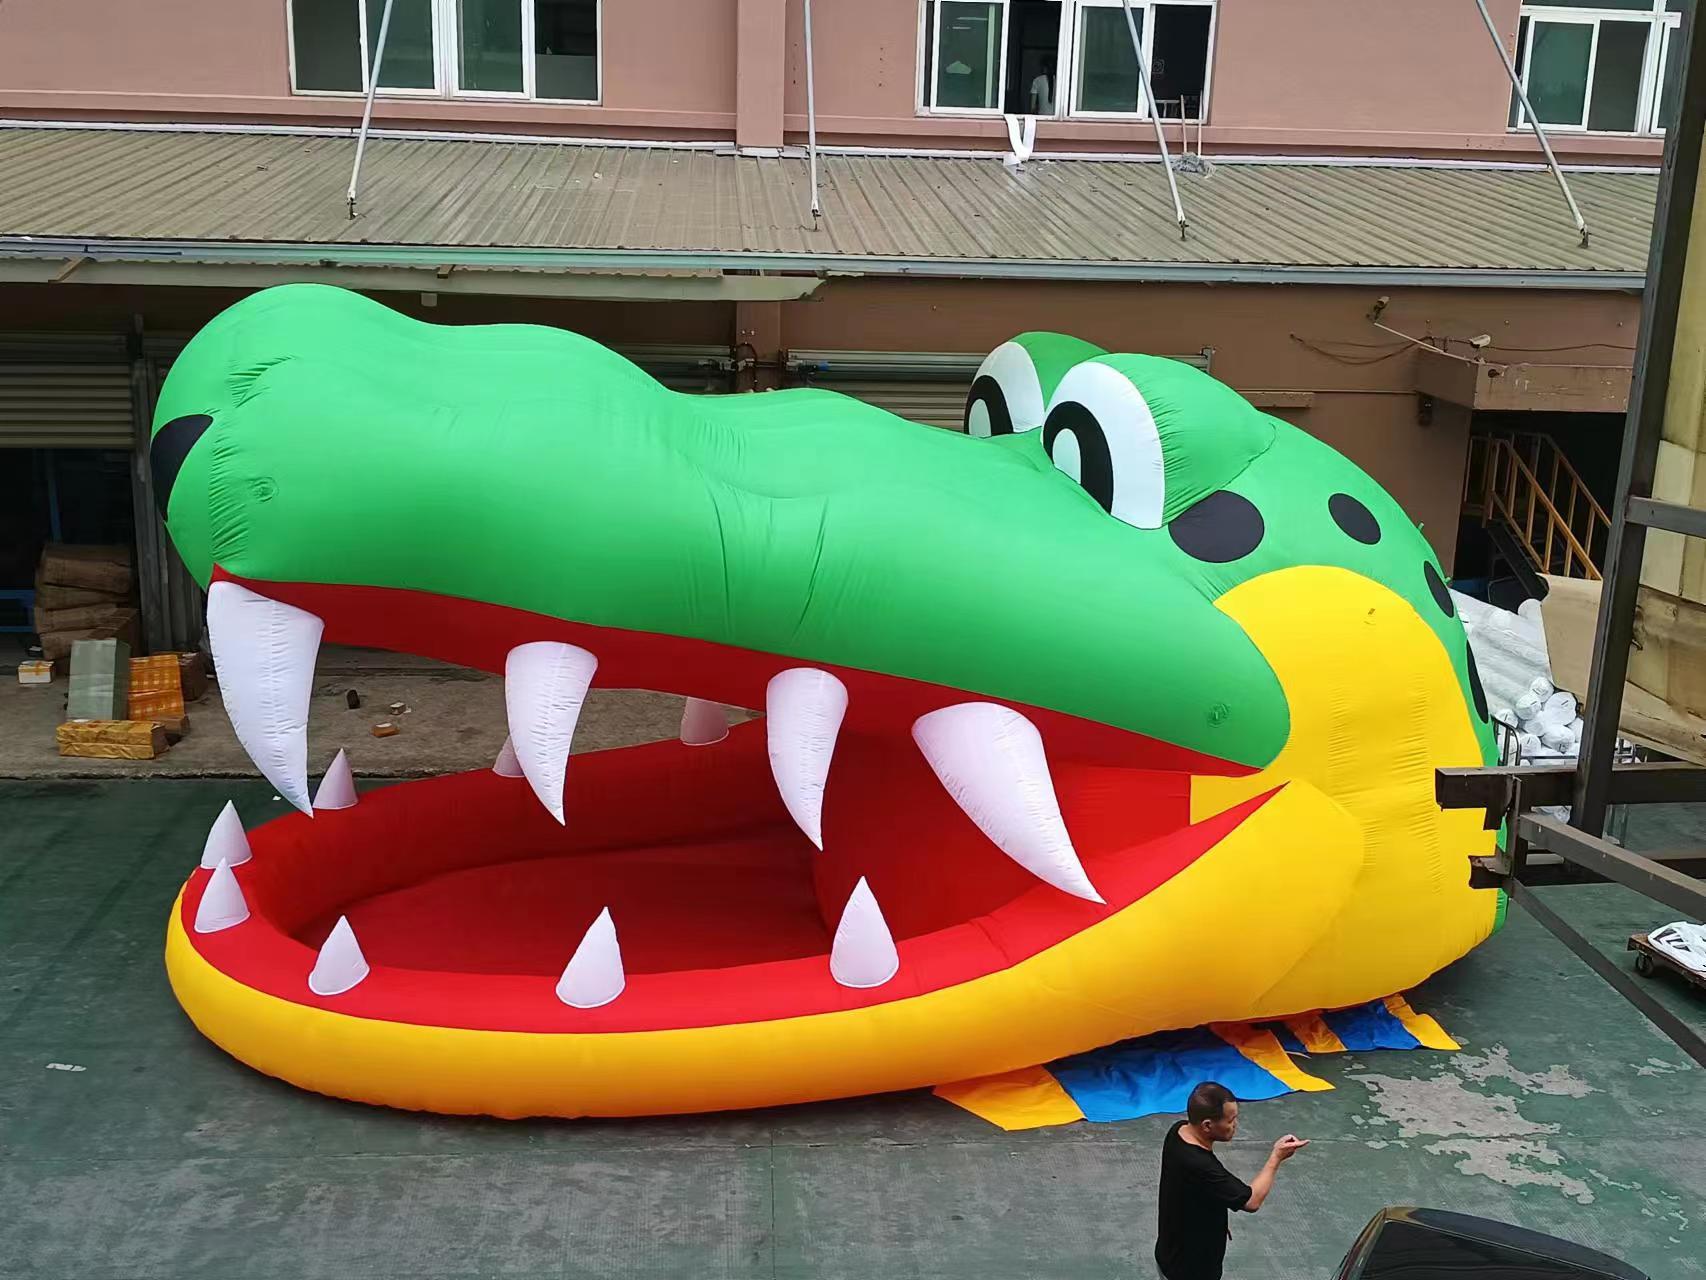 6.7m Lx4.25m Wx5m H (22x14x16.5ft) Customized inflatable crocodile head dj booth dj bar table concession station with big mouth for Sale88